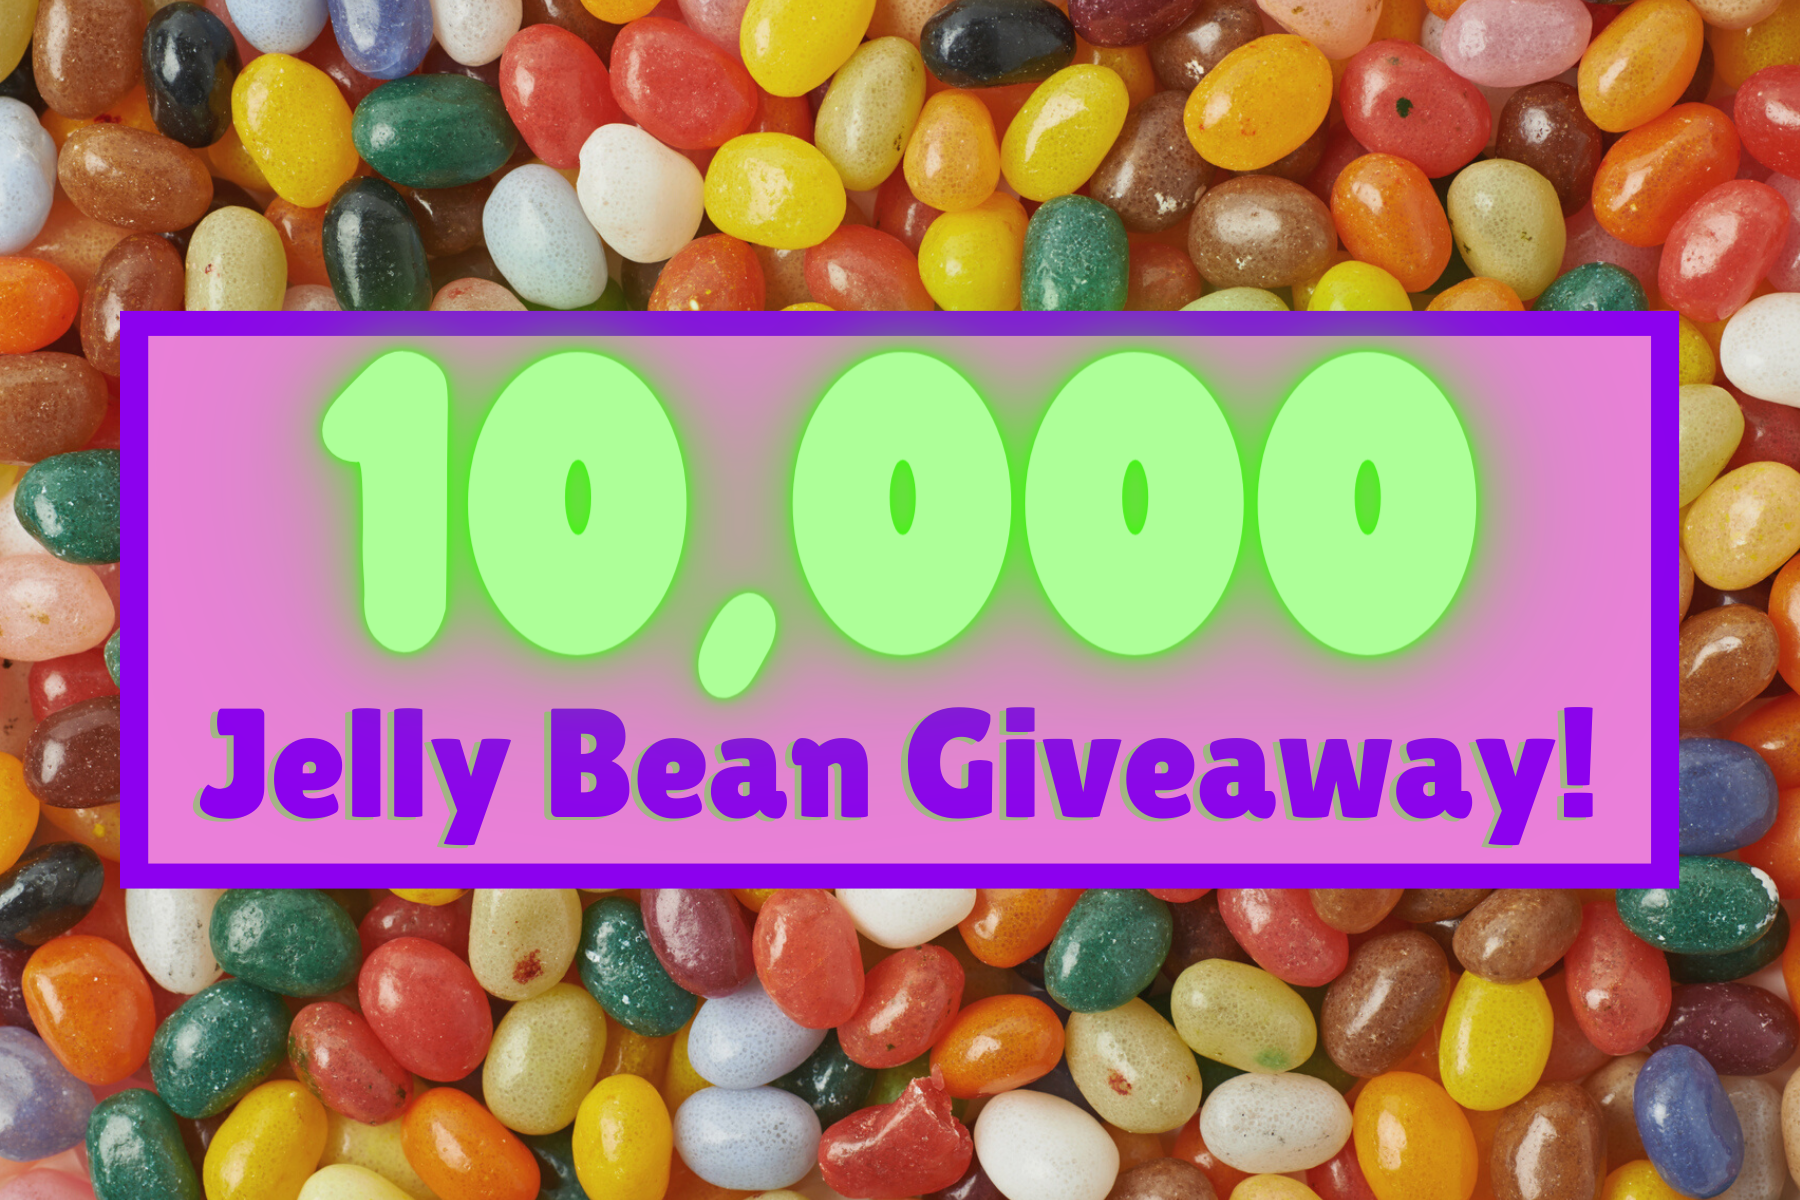 Jelly Bean Giveaway